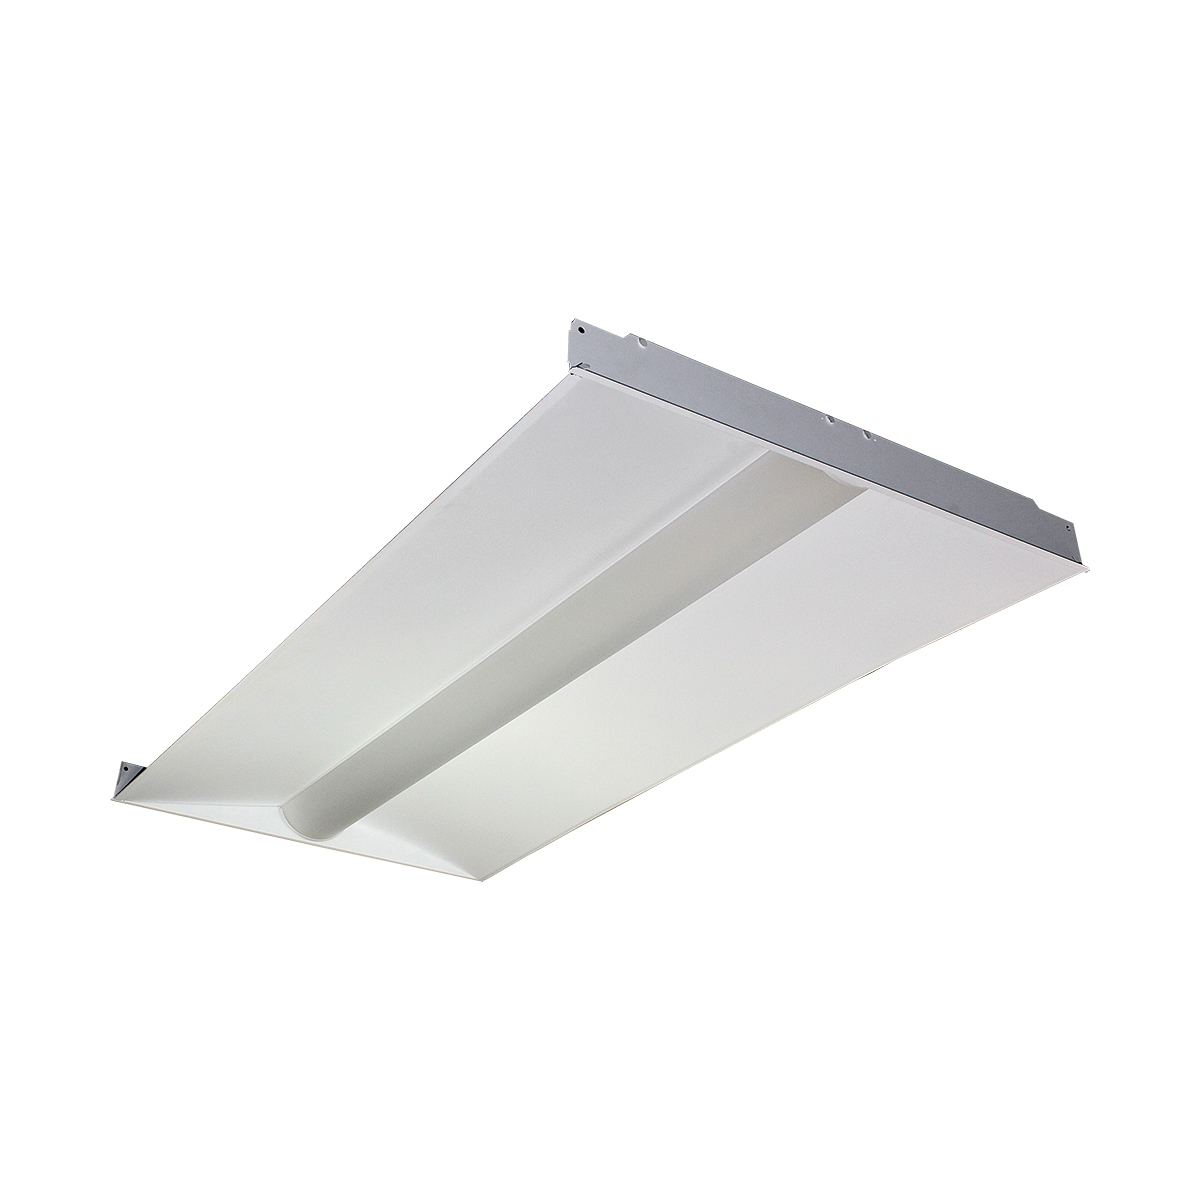 Low Profile Narrow-Lens Recessed Troffer